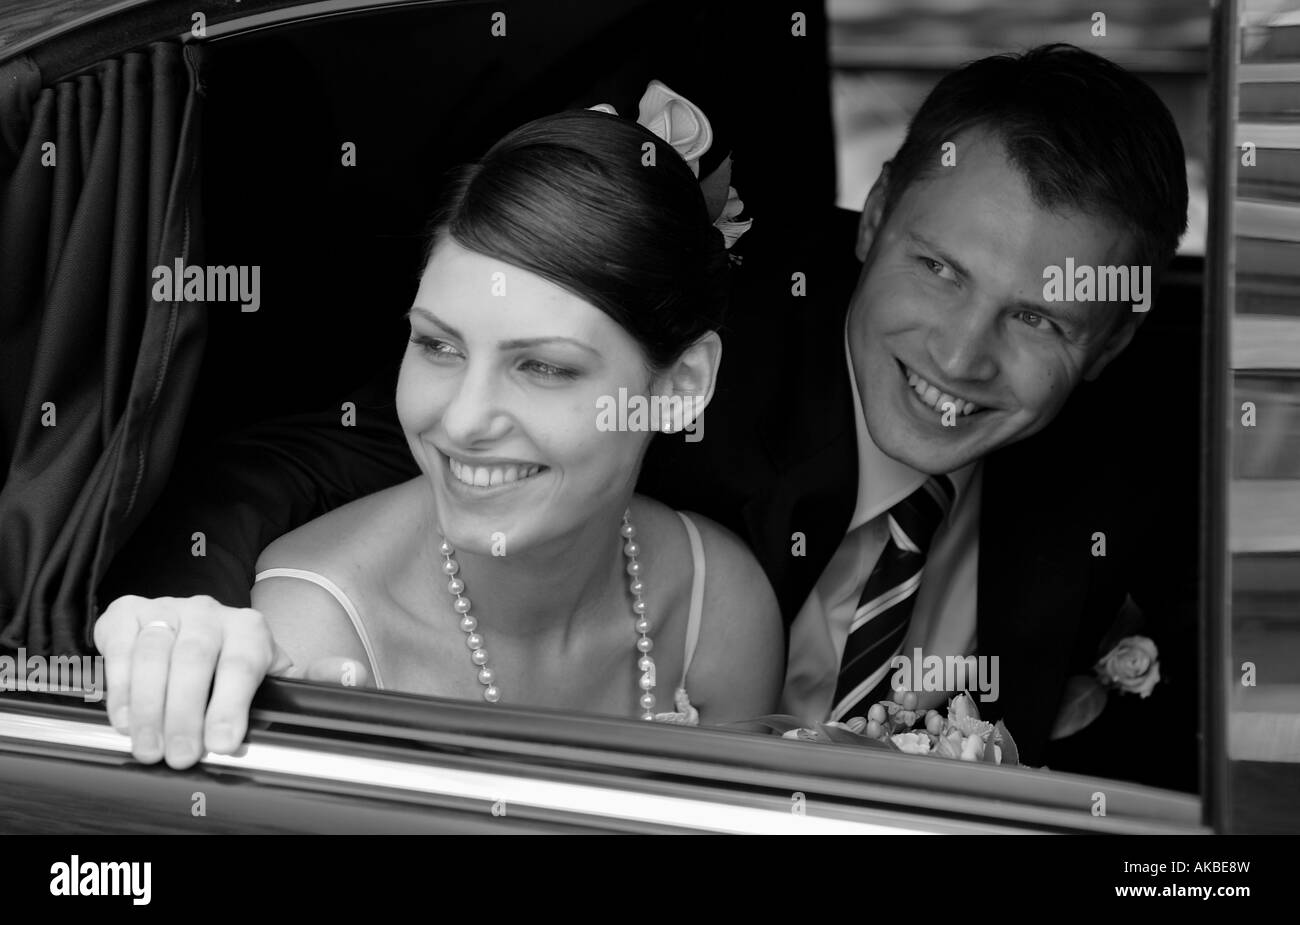 Bride and groom in wedding car limousine. They are smiling out of the window. Stock Photo